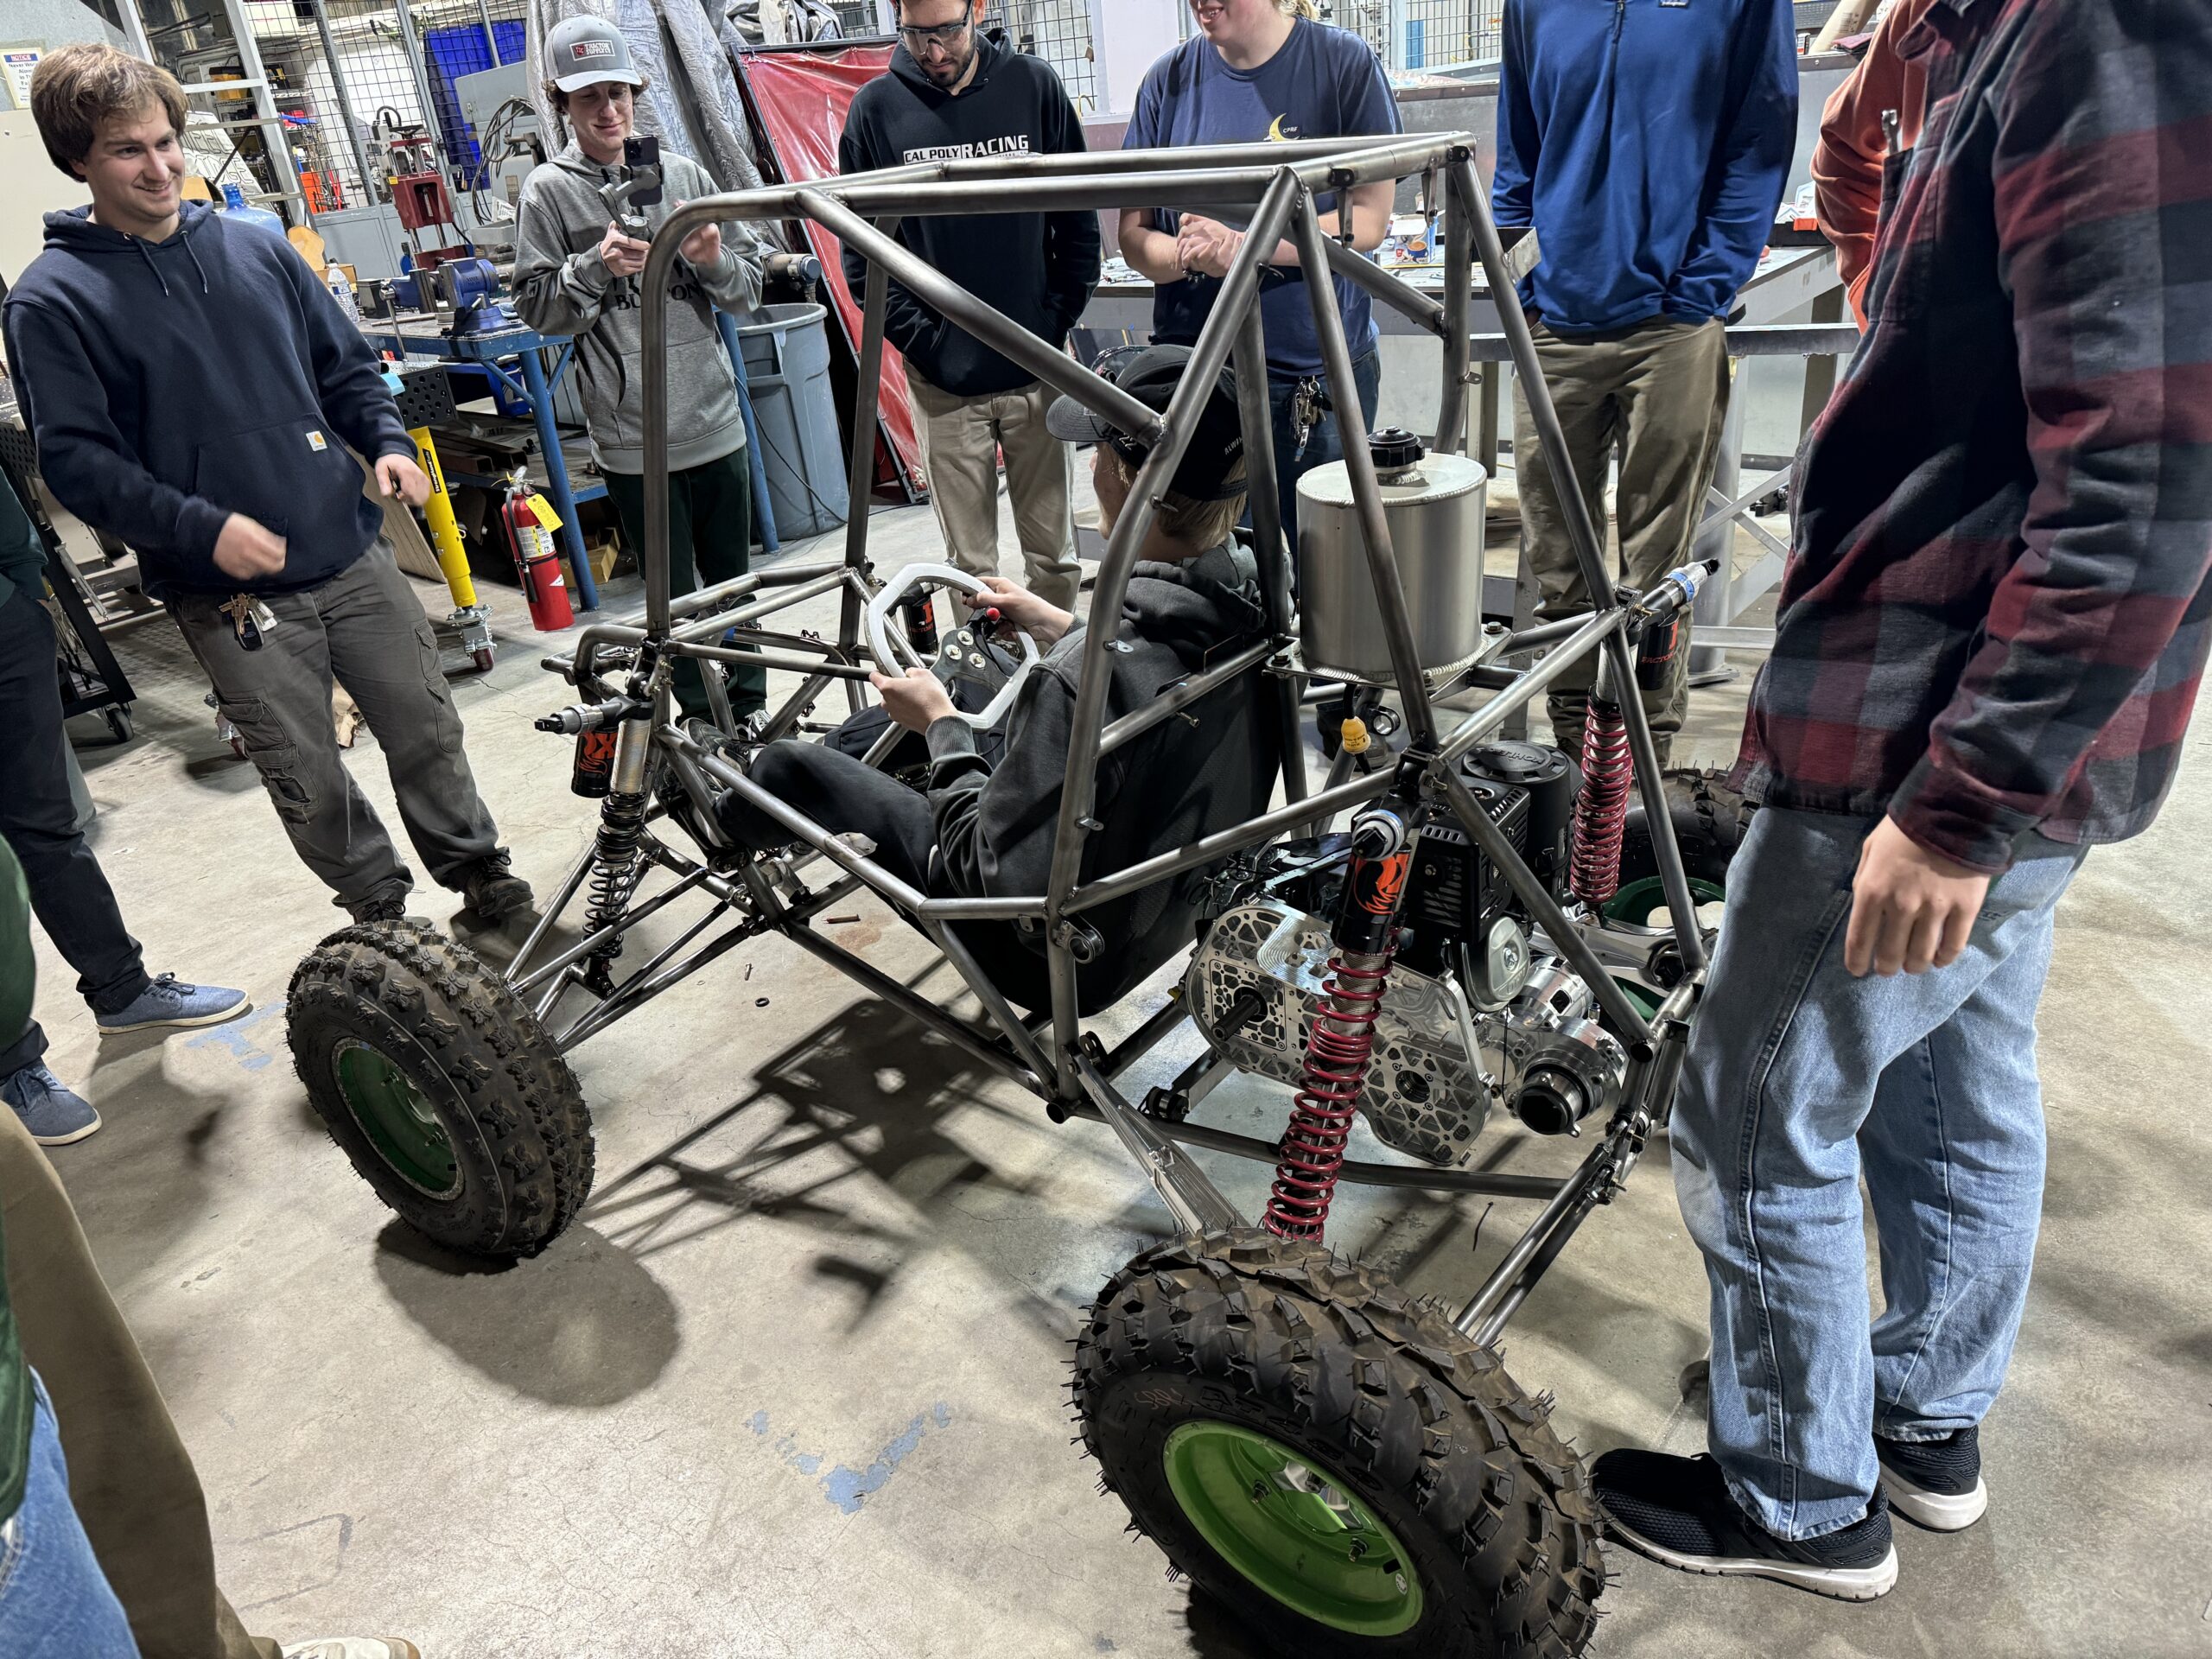 Students put the vehicle on the ground for the first time in the Hangar machine shop